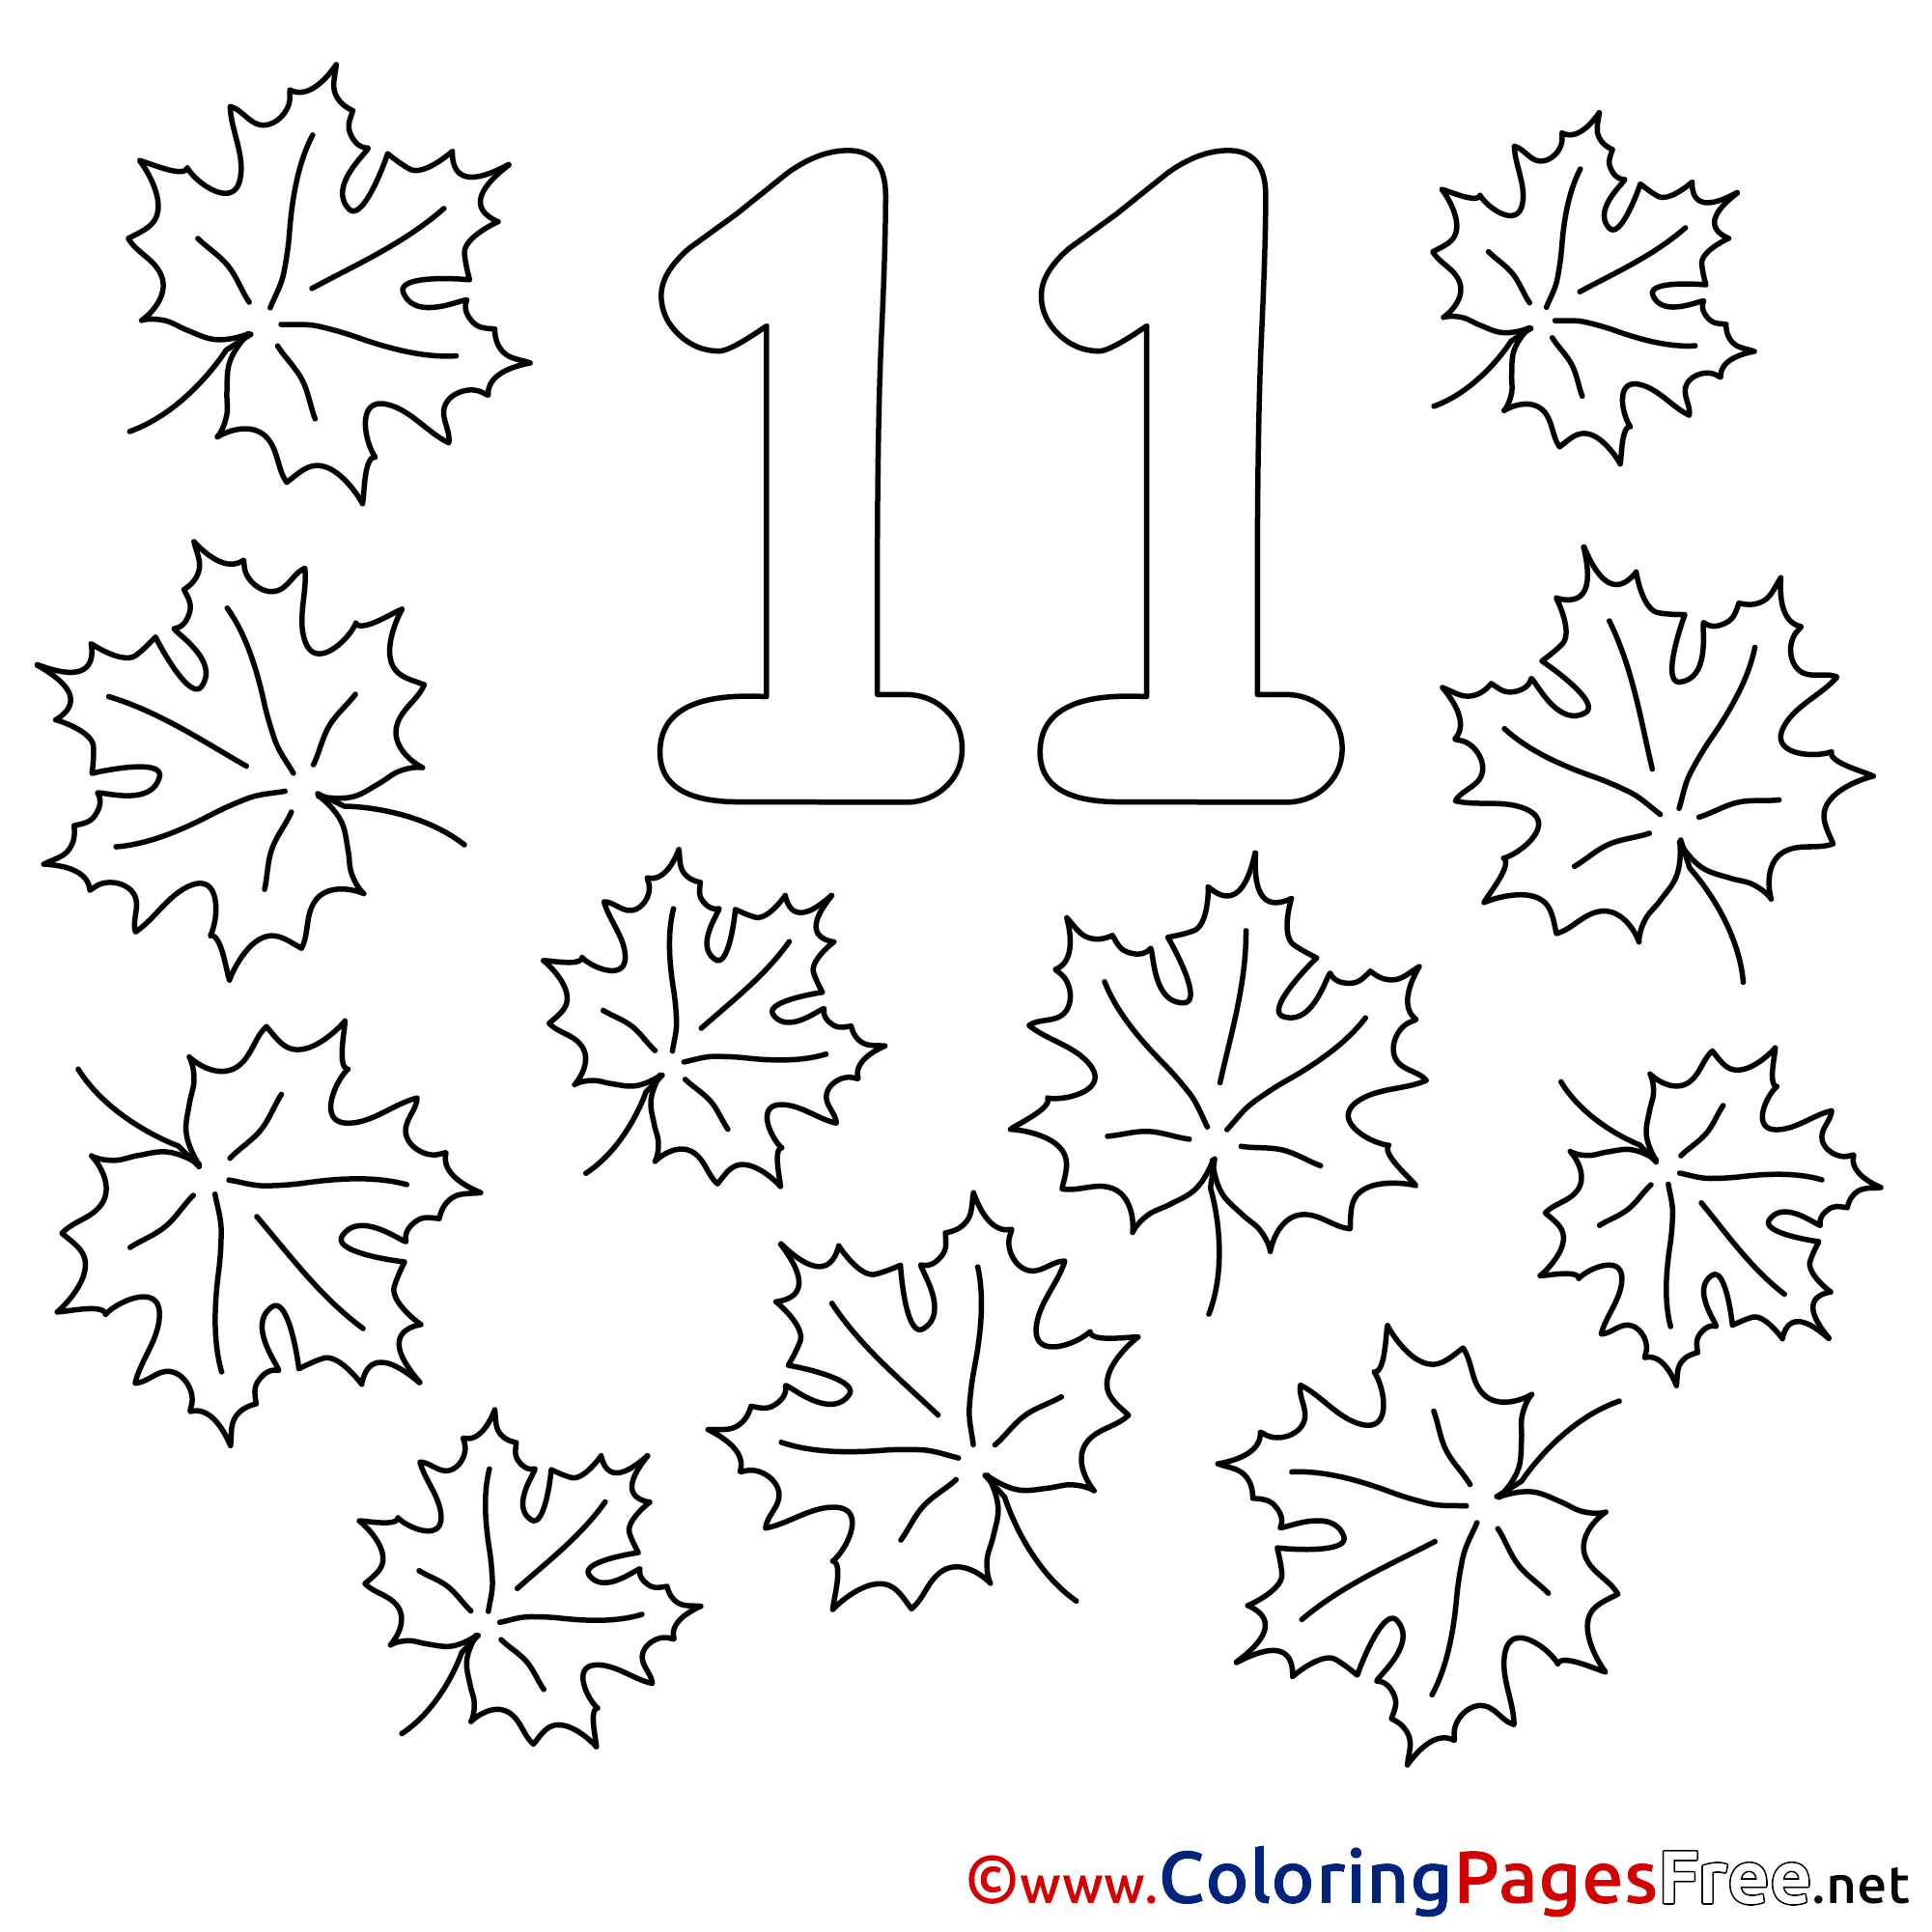 11 Printable Color by Numbers Pages — Stephen's Place